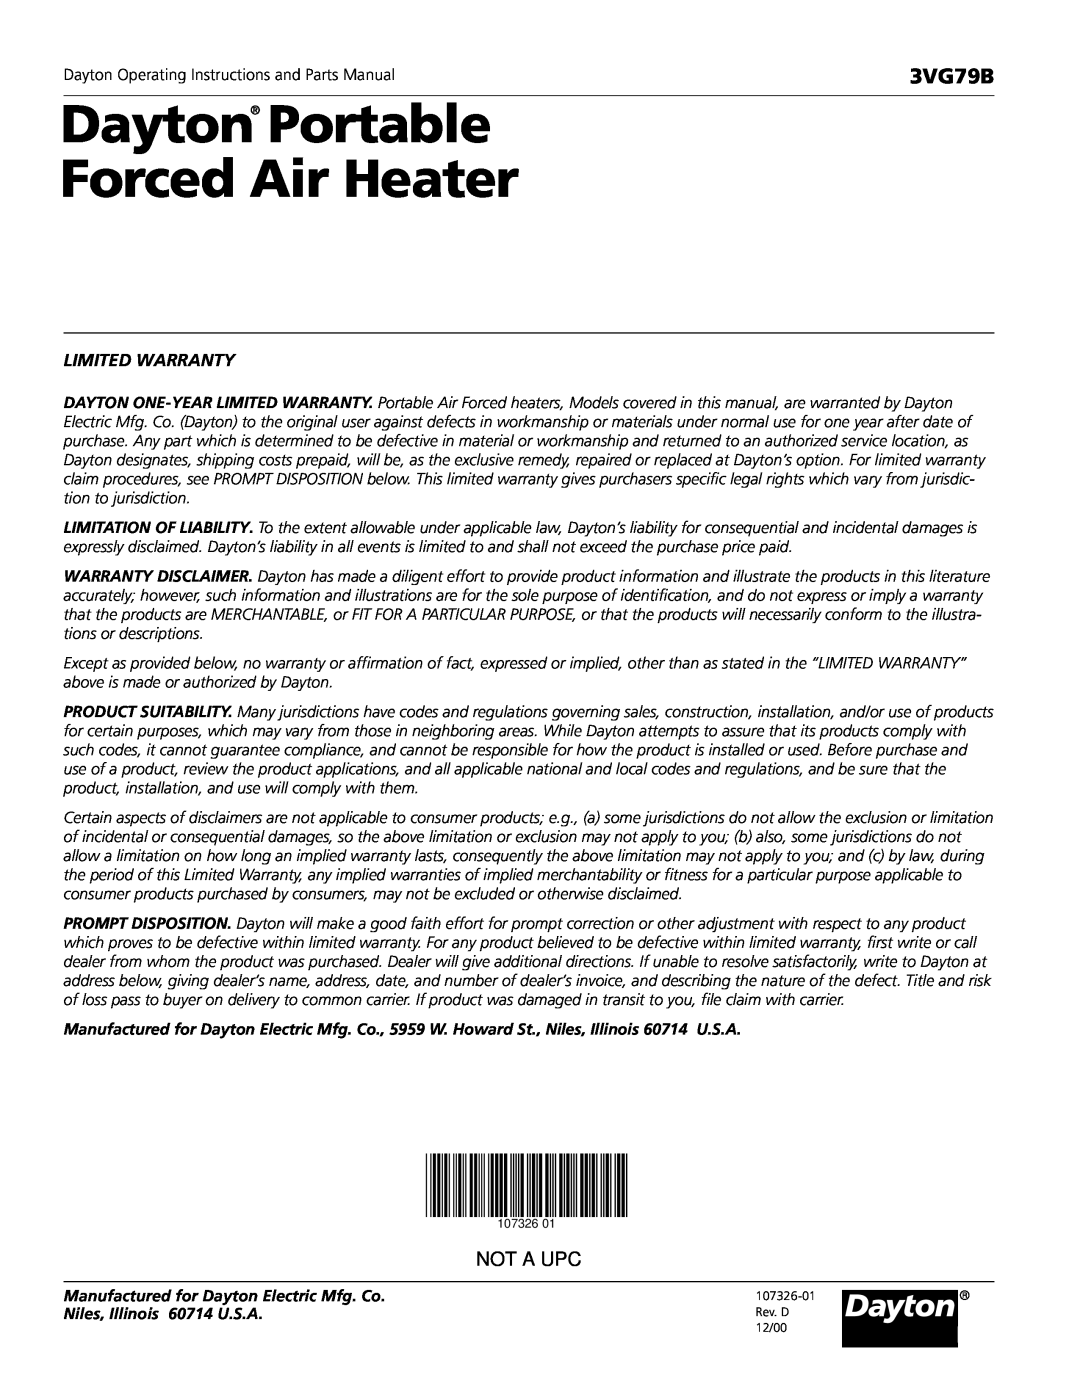 Dayton 3VG79B operating instructions Dayton Portable Forced Air Heater, Not A Upc, Limited Warranty 